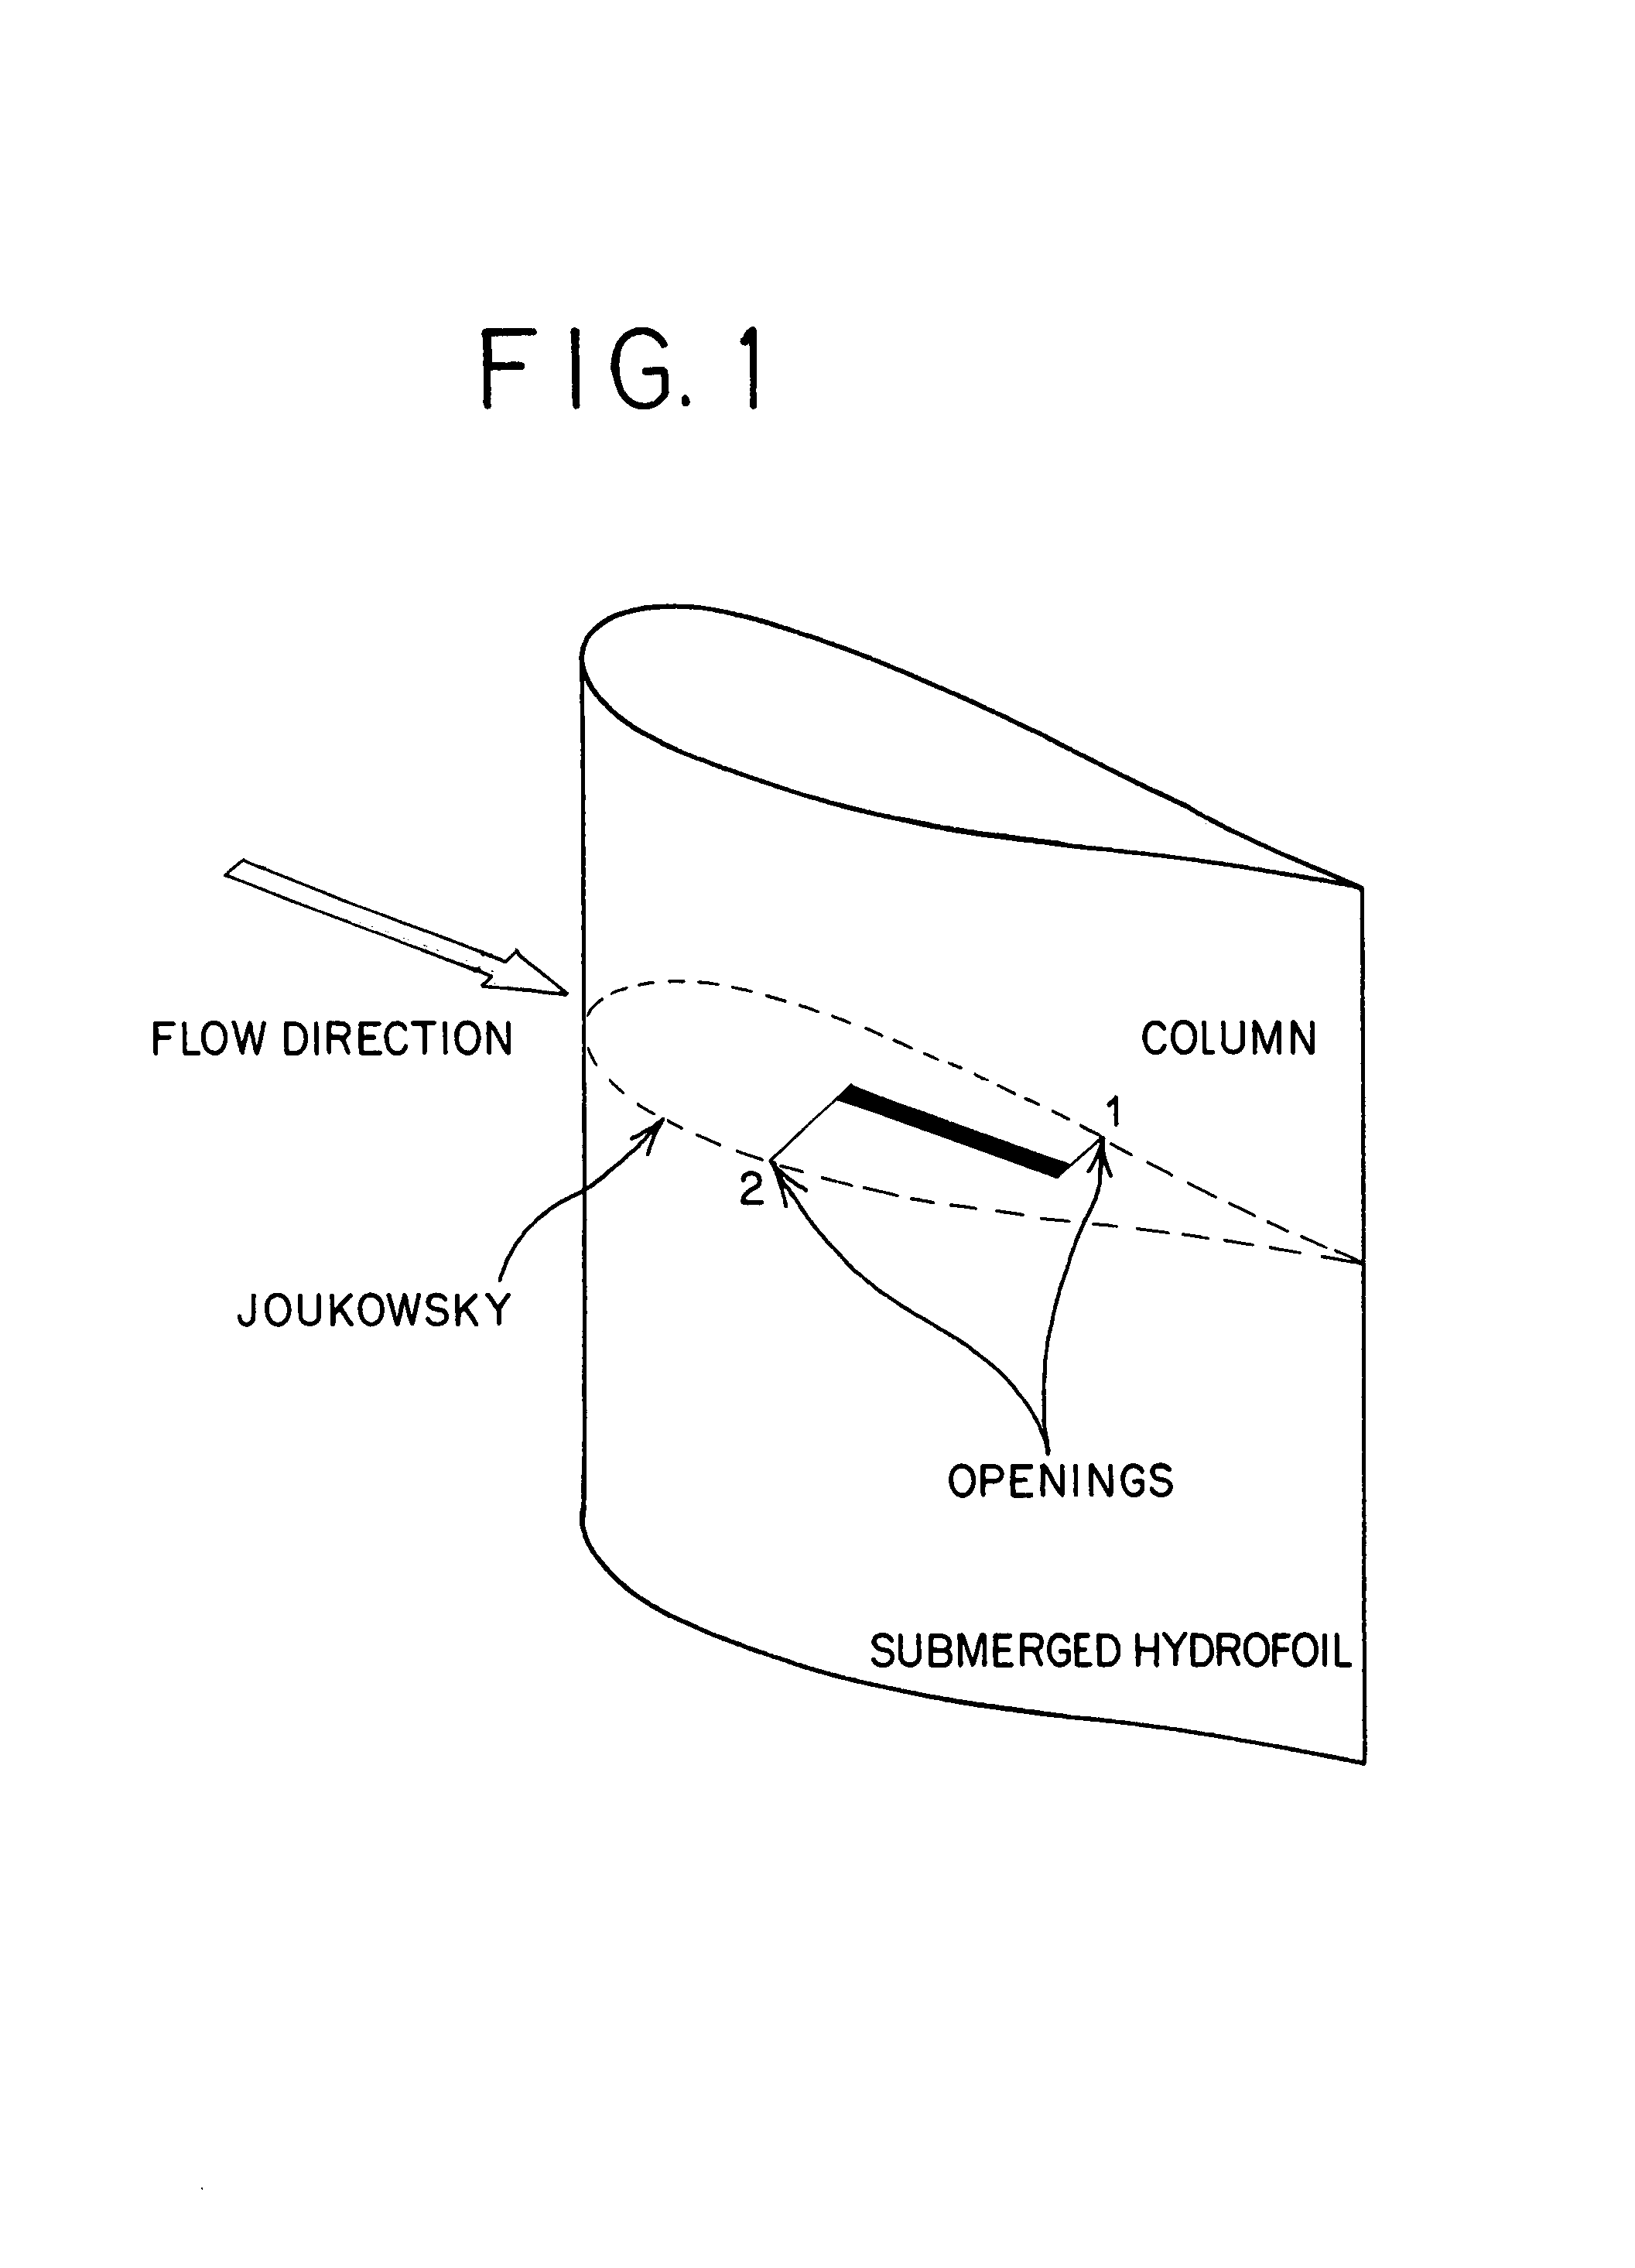 Device and method for passively measuring fluid and target chemical mass fluxes in natural and constructed non-porous fluid flow system